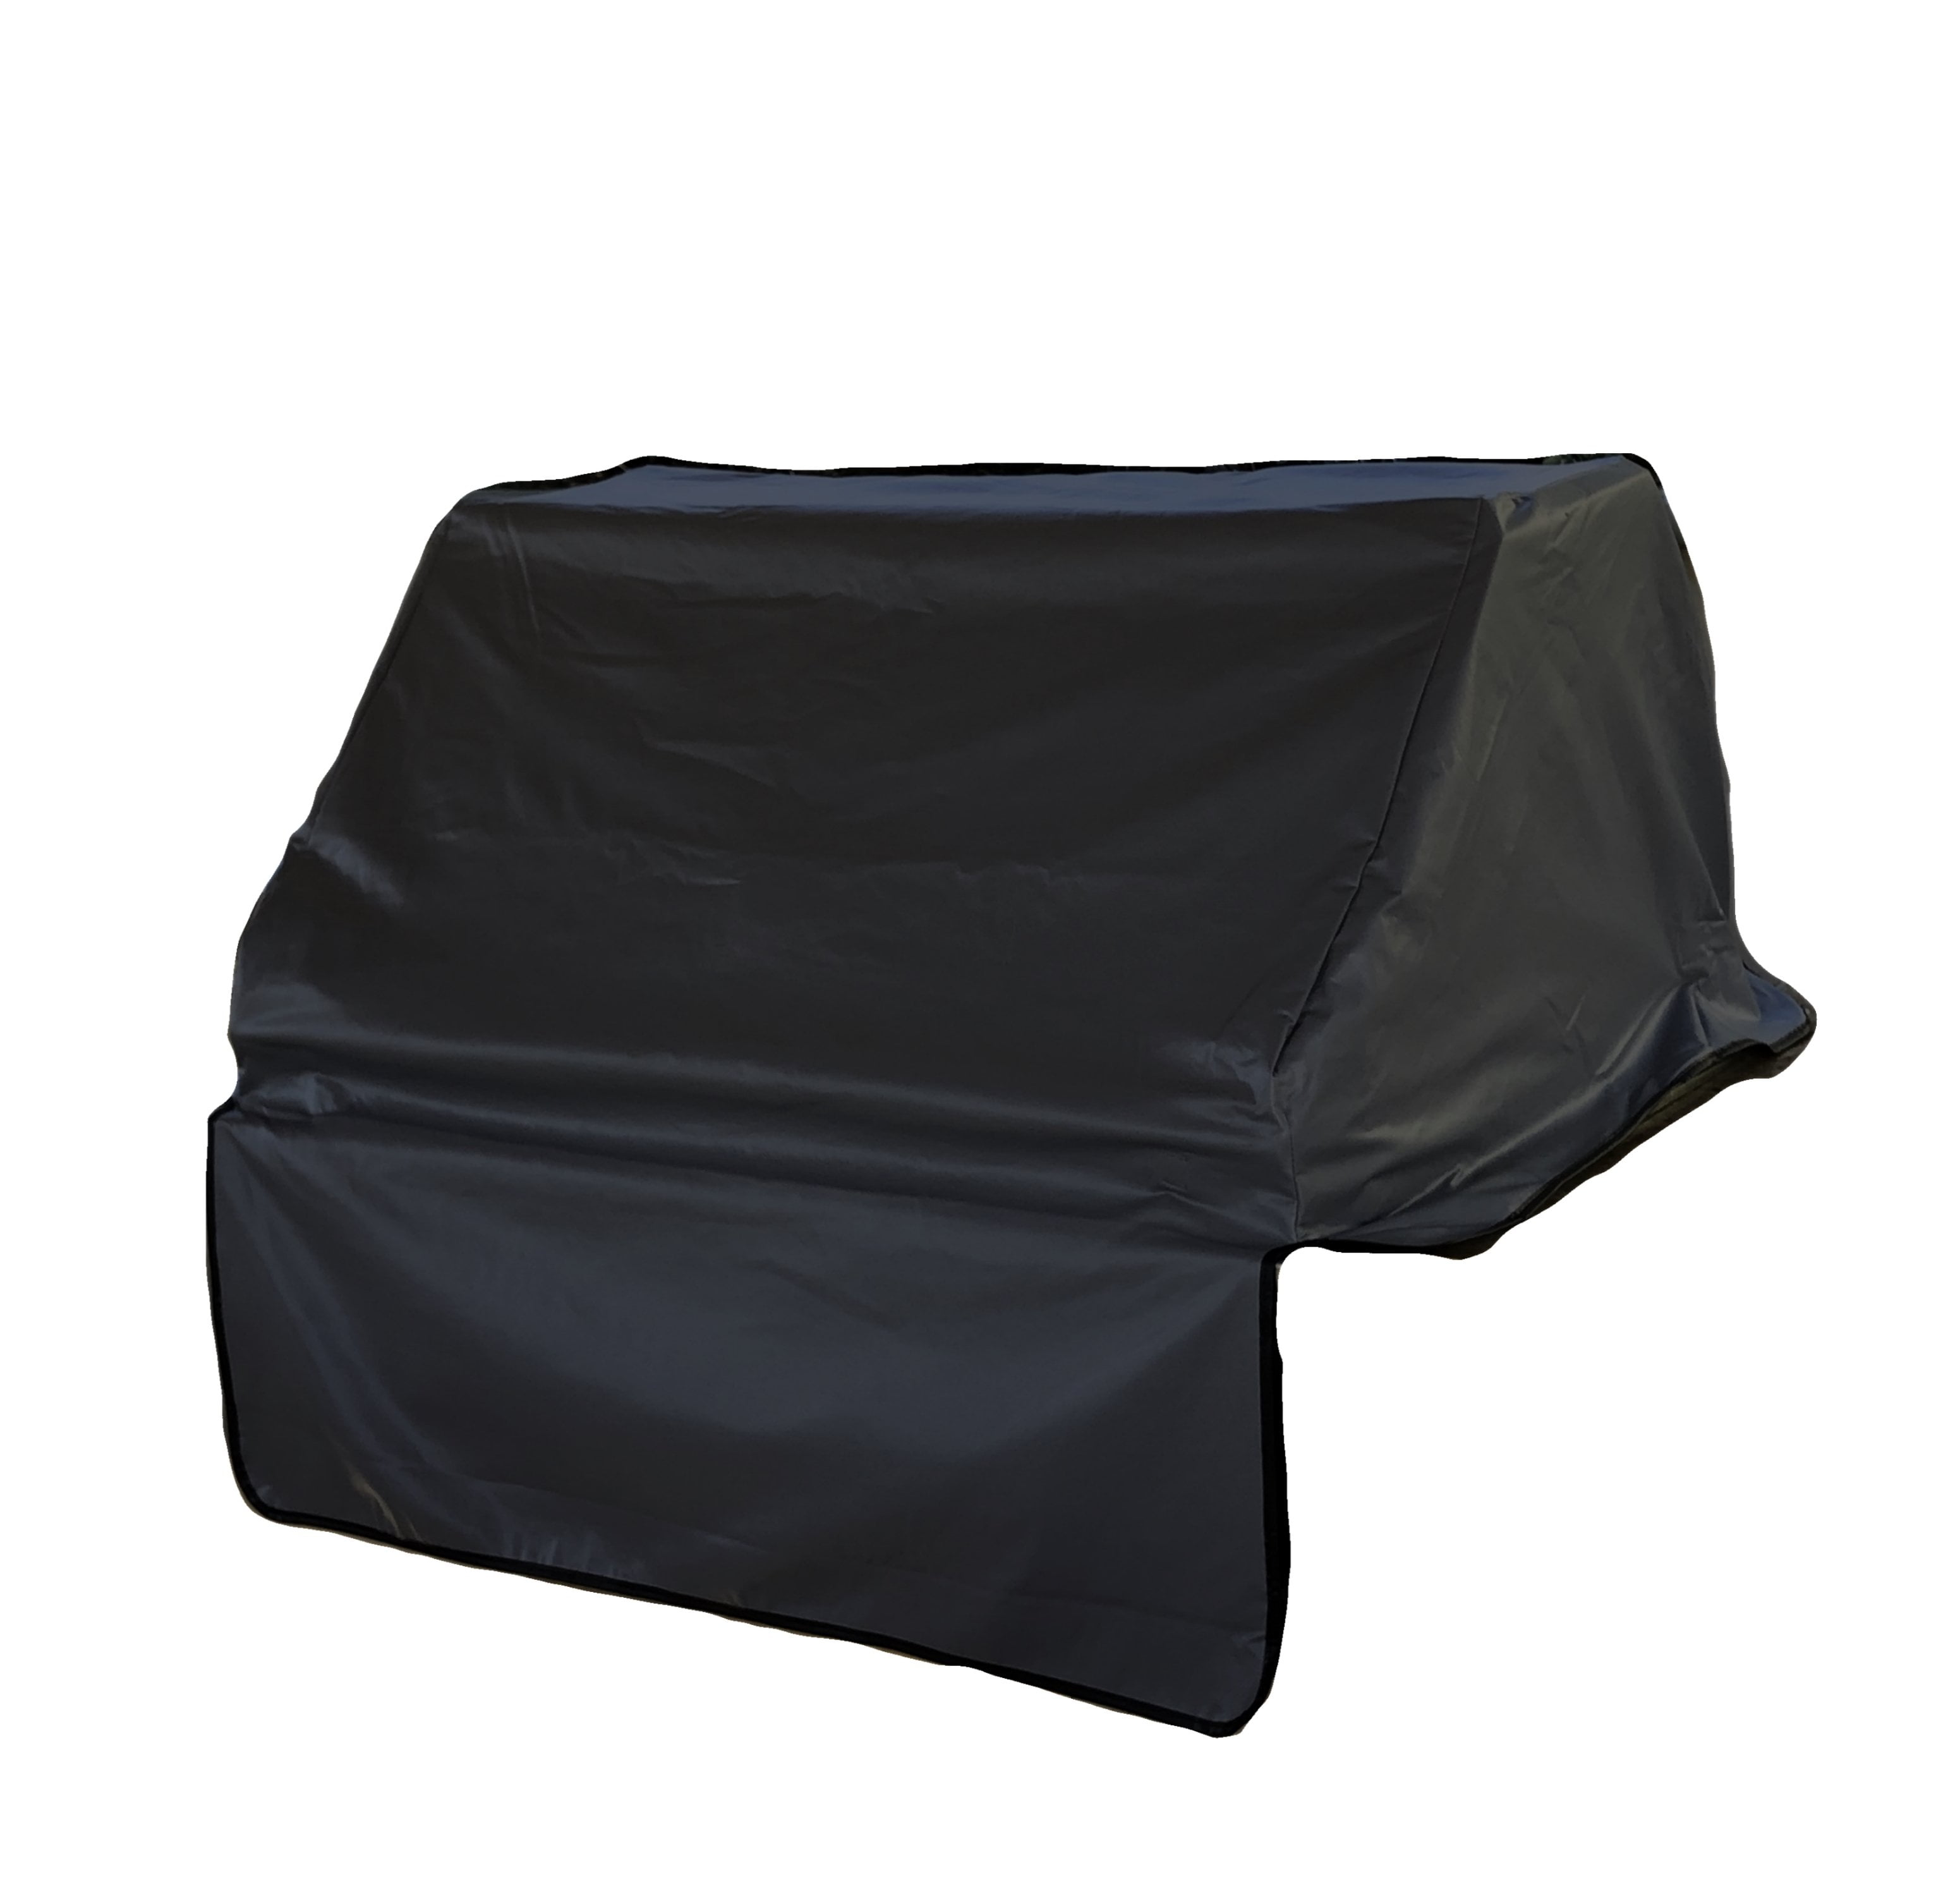 Bbq Outdoor Gas Grill Cover, Outdoor Grill Cover